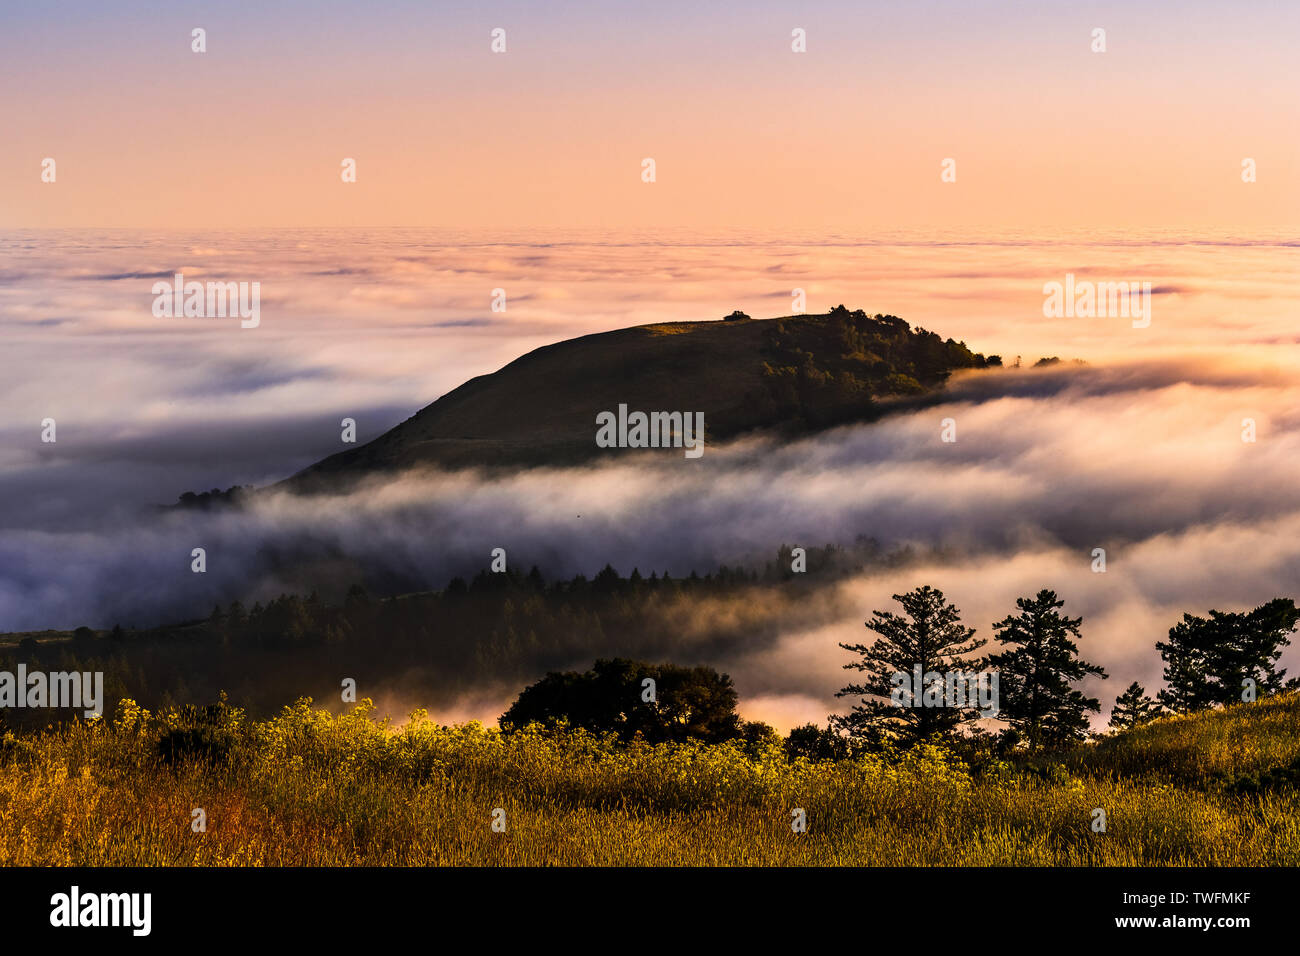 Sunset view of mountain top rising up above a sea of clouds in the Santa Cruz mountains; San Francisco bay area, California Stock Photo